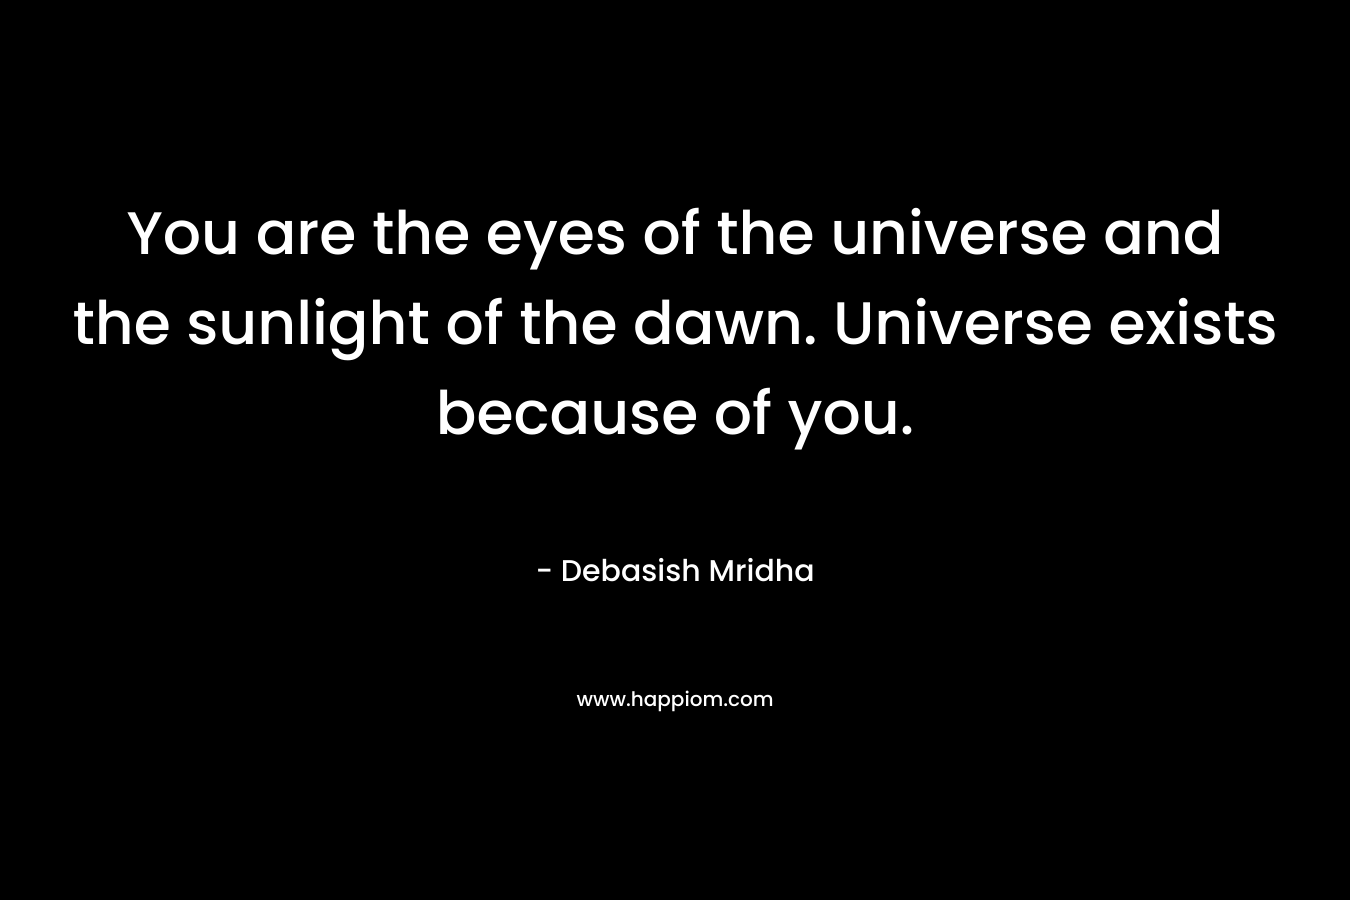 You are the eyes of the universe and the sunlight of the dawn. Universe exists because of you.